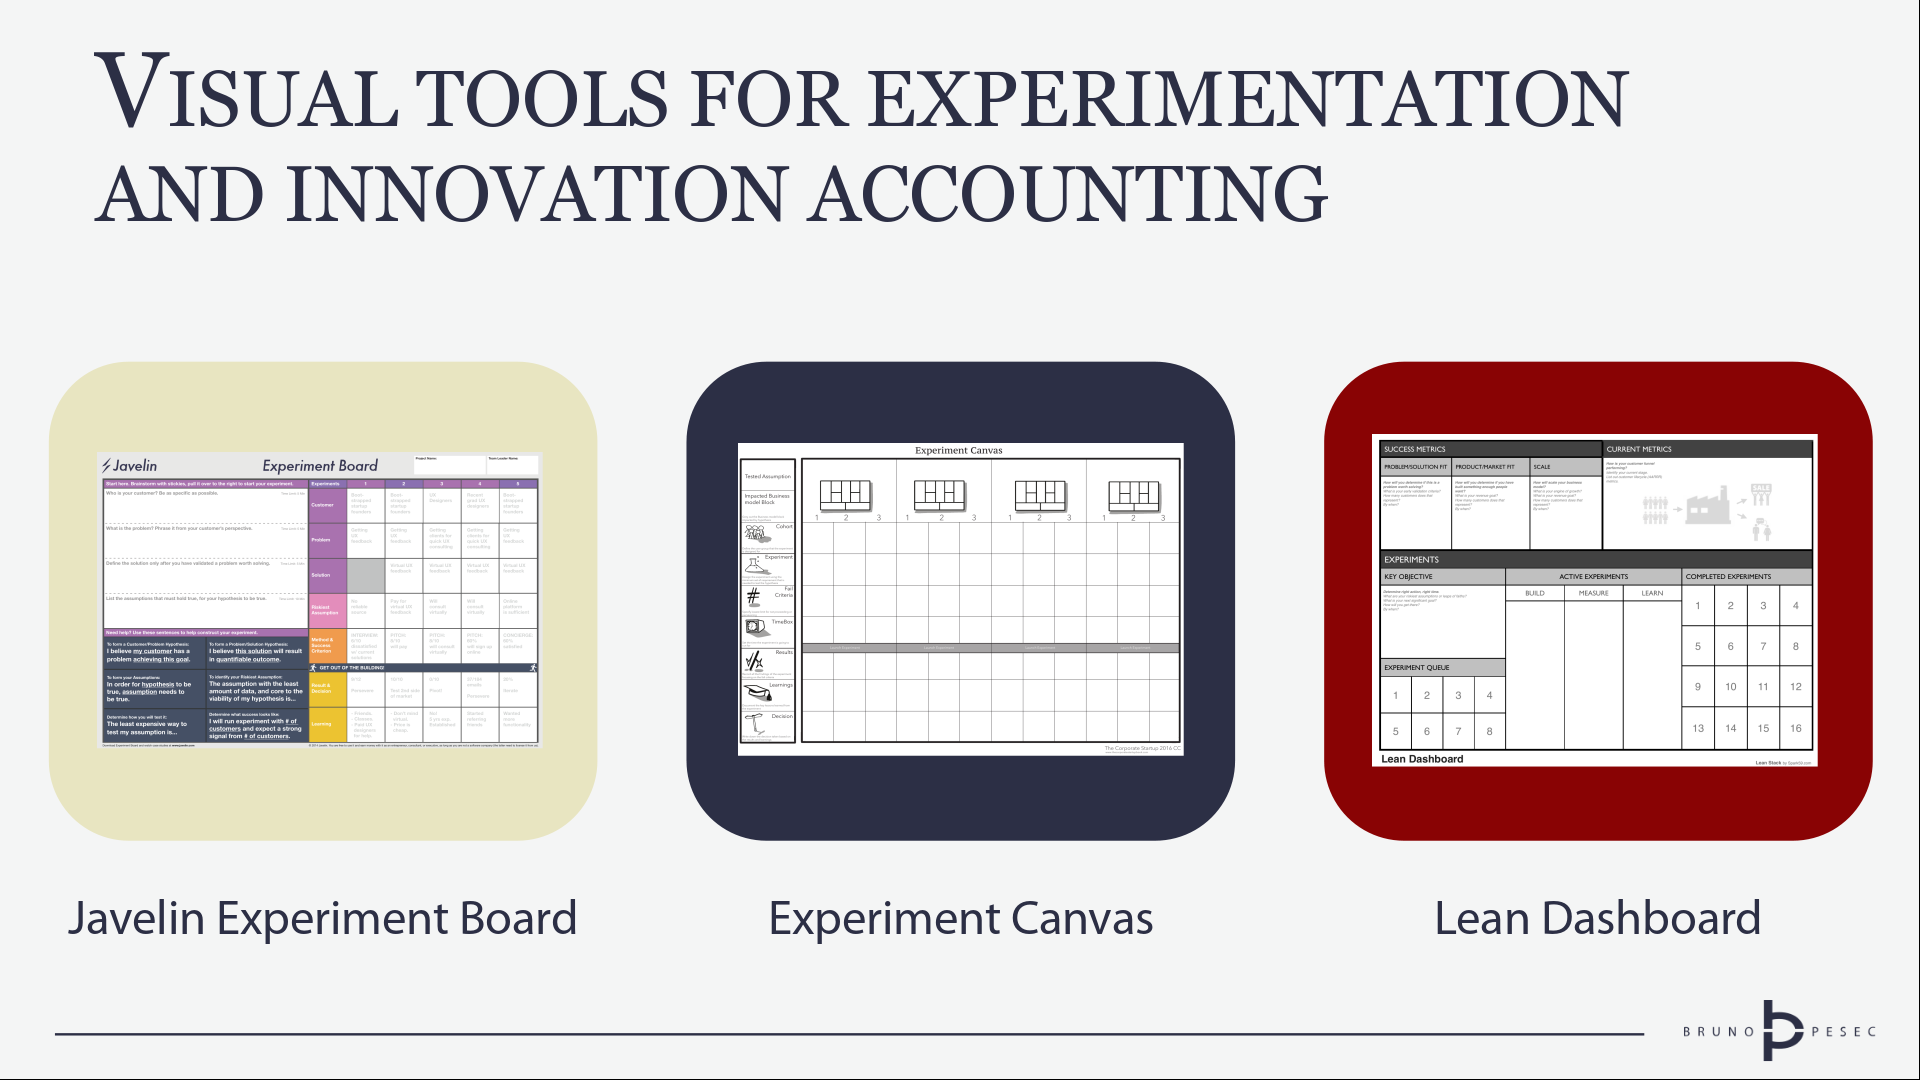 Visual tools for experimentation and innovation accounting